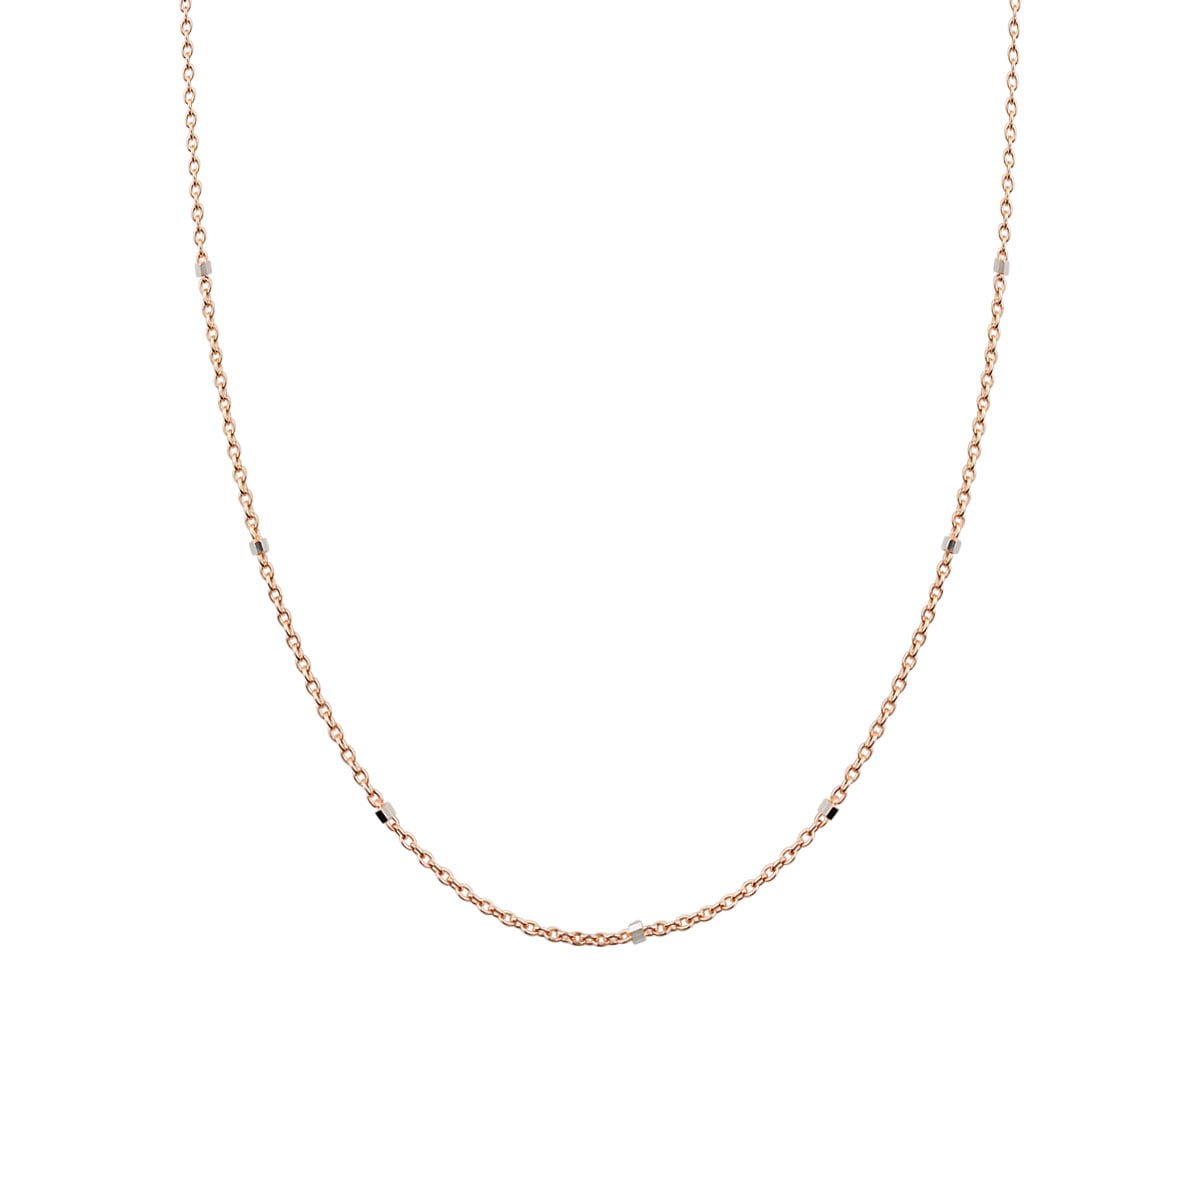 18ct Rose Gold Oval Link Bobble Chain Necklace